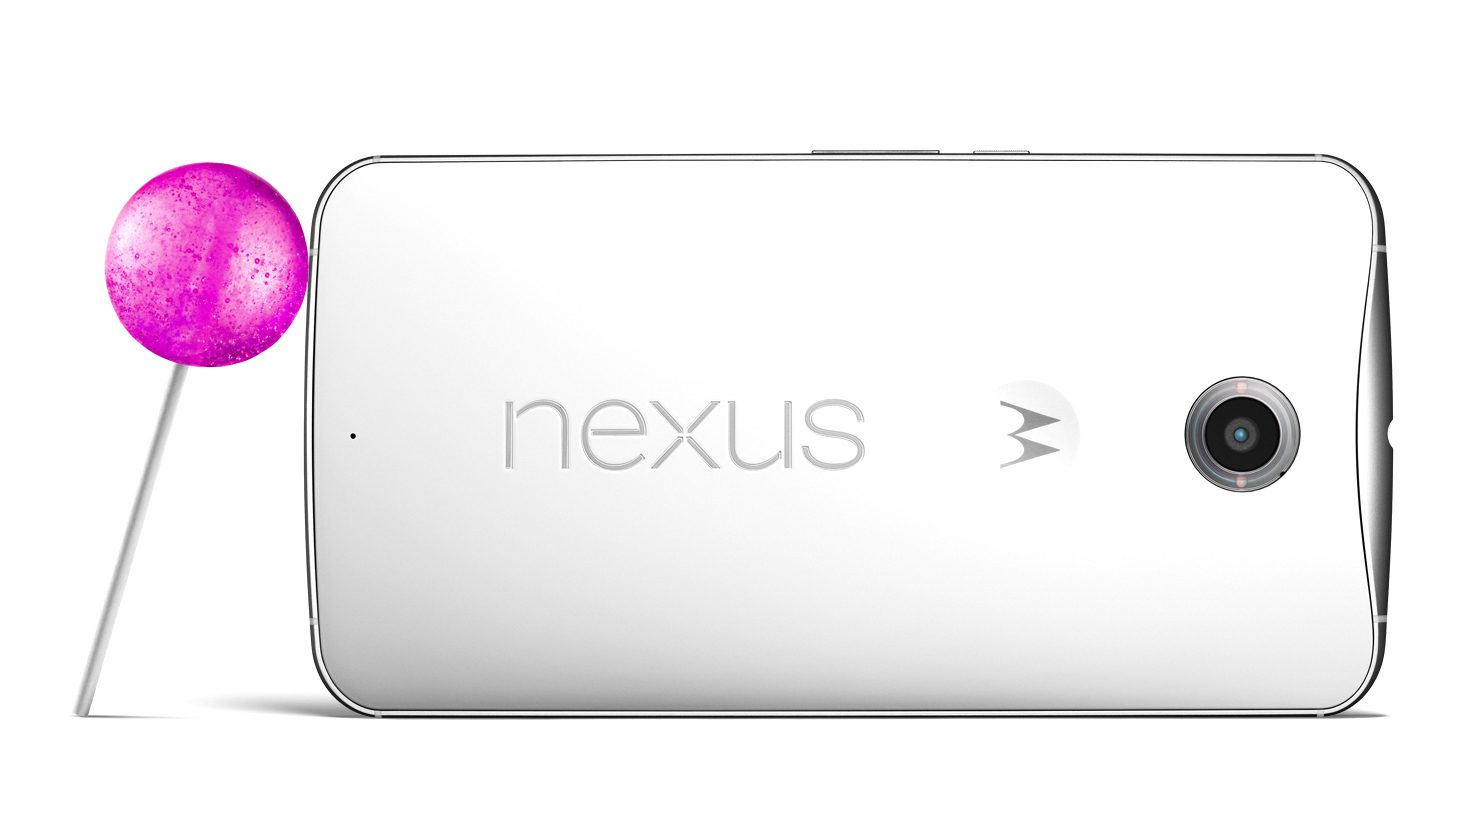 Android Lollipop v5.1 is out and has started hitting the Nexus smartphones and tablets